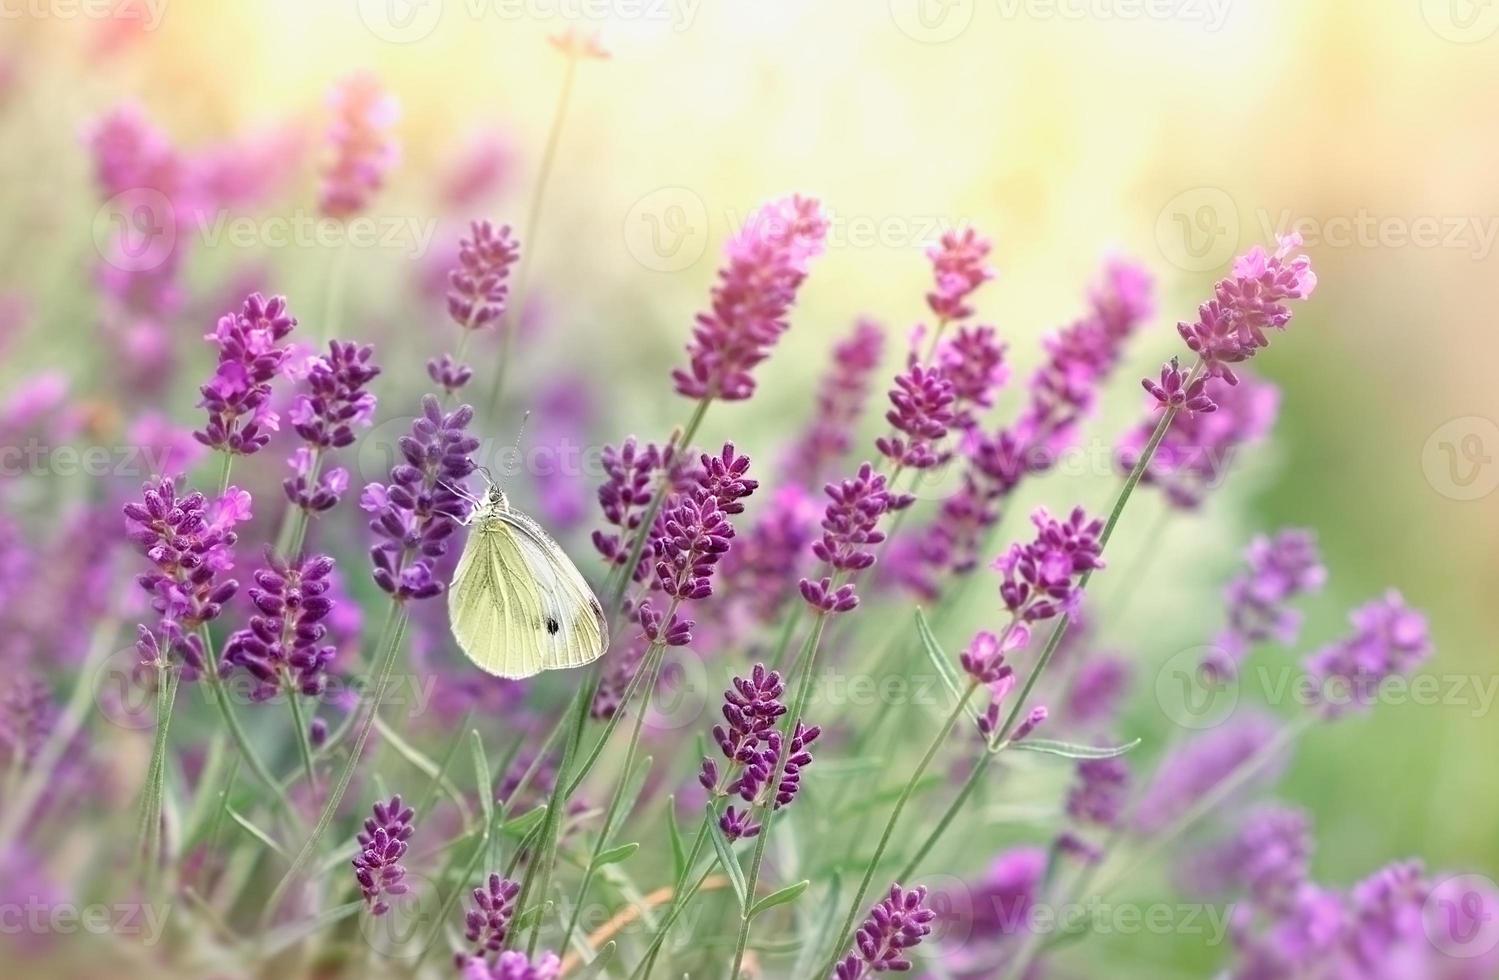 Butterfly on lavender flower photo